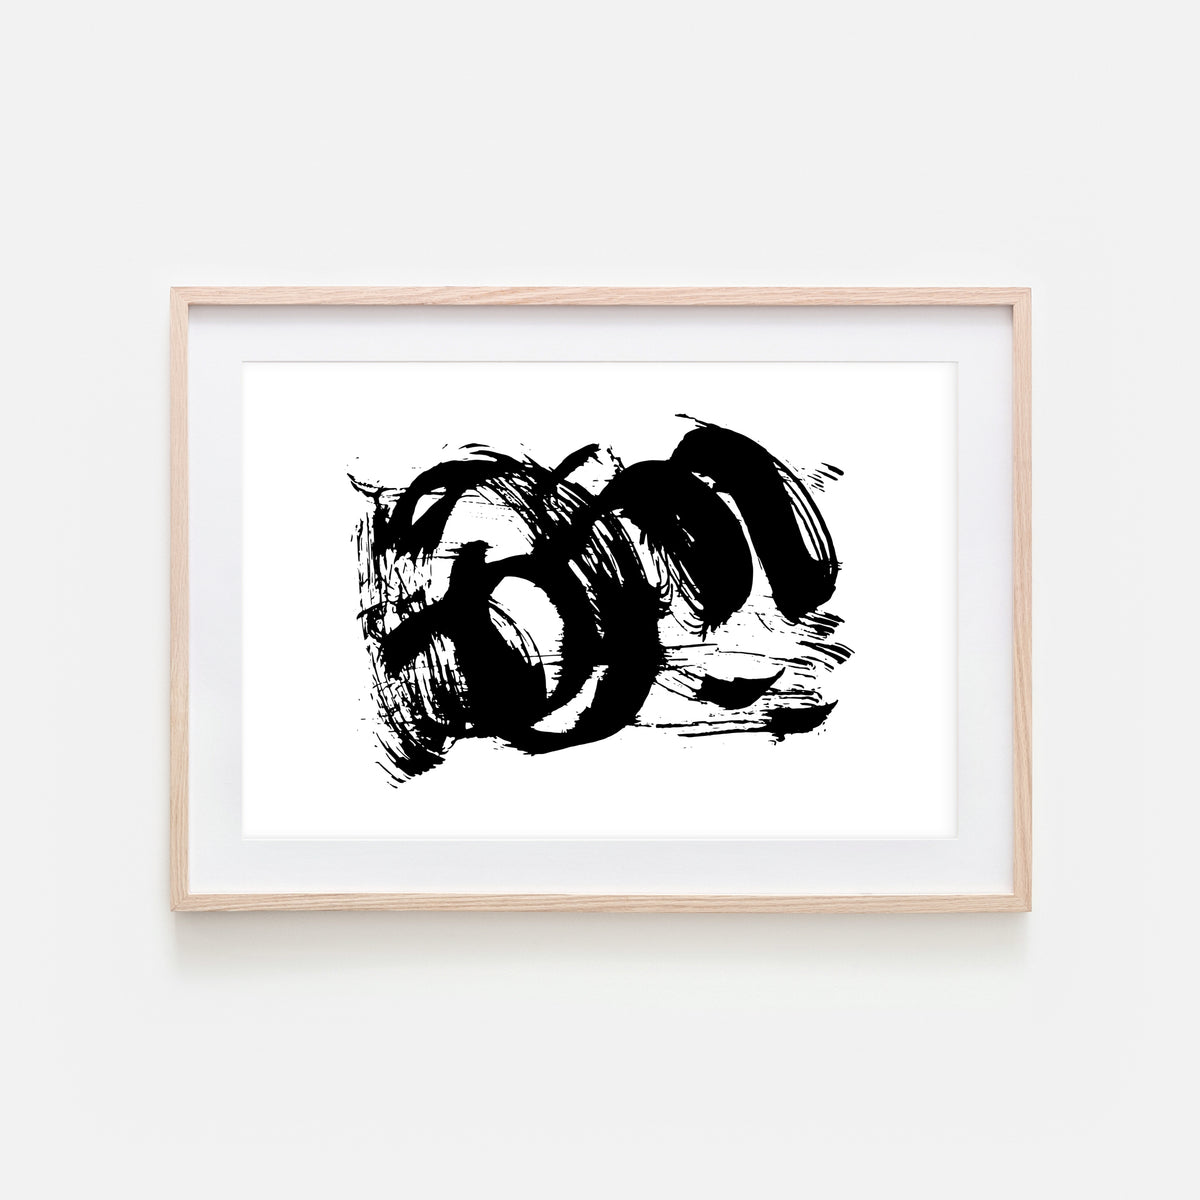 Paintbrushes Black And White Close Up Still Life Photo Cool Wall Decor Art  Print Poster 18x12 - Poster Foundry